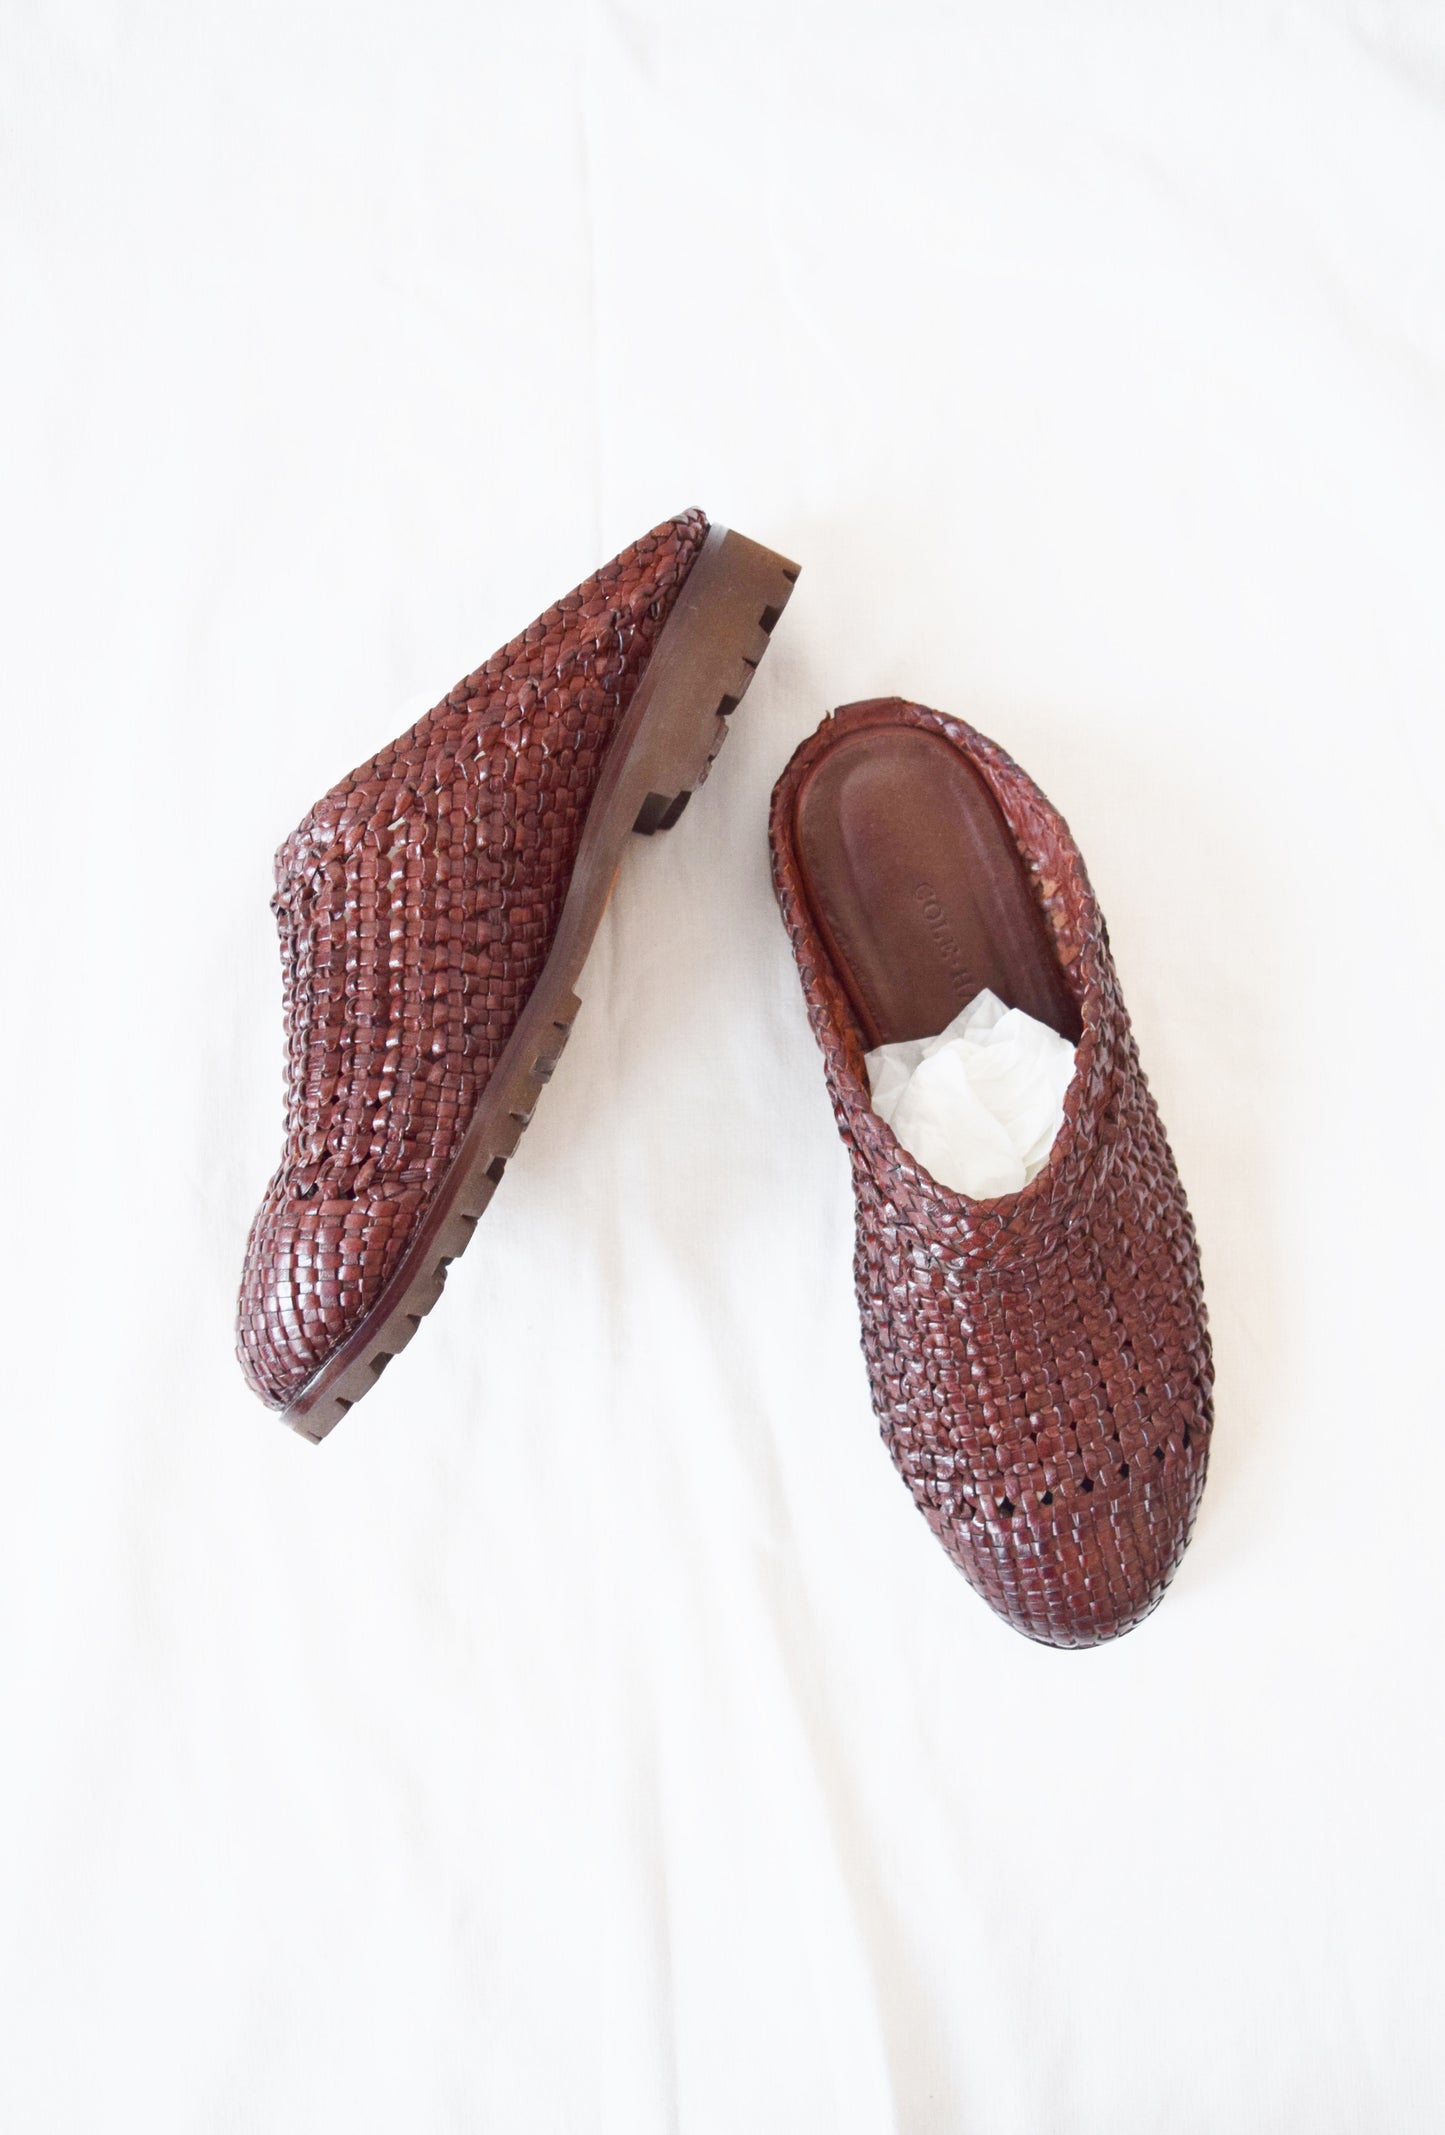 Cole Haan Indian-Style Leather Slides | Men's US 8.5, Women's 10.5